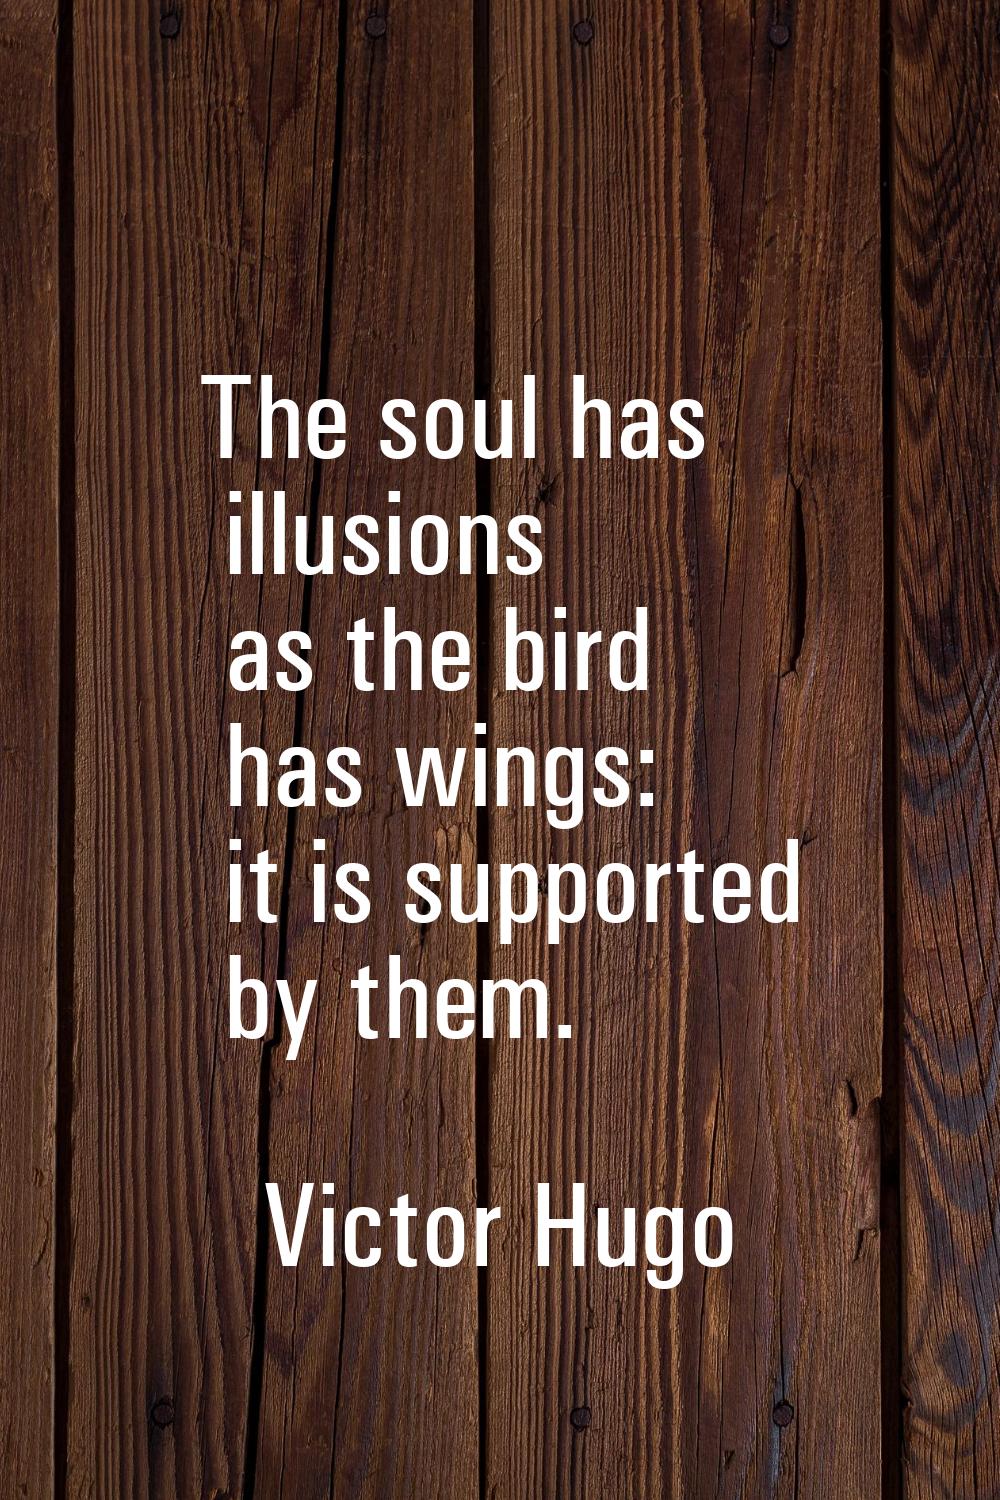 The soul has illusions as the bird has wings: it is supported by them.